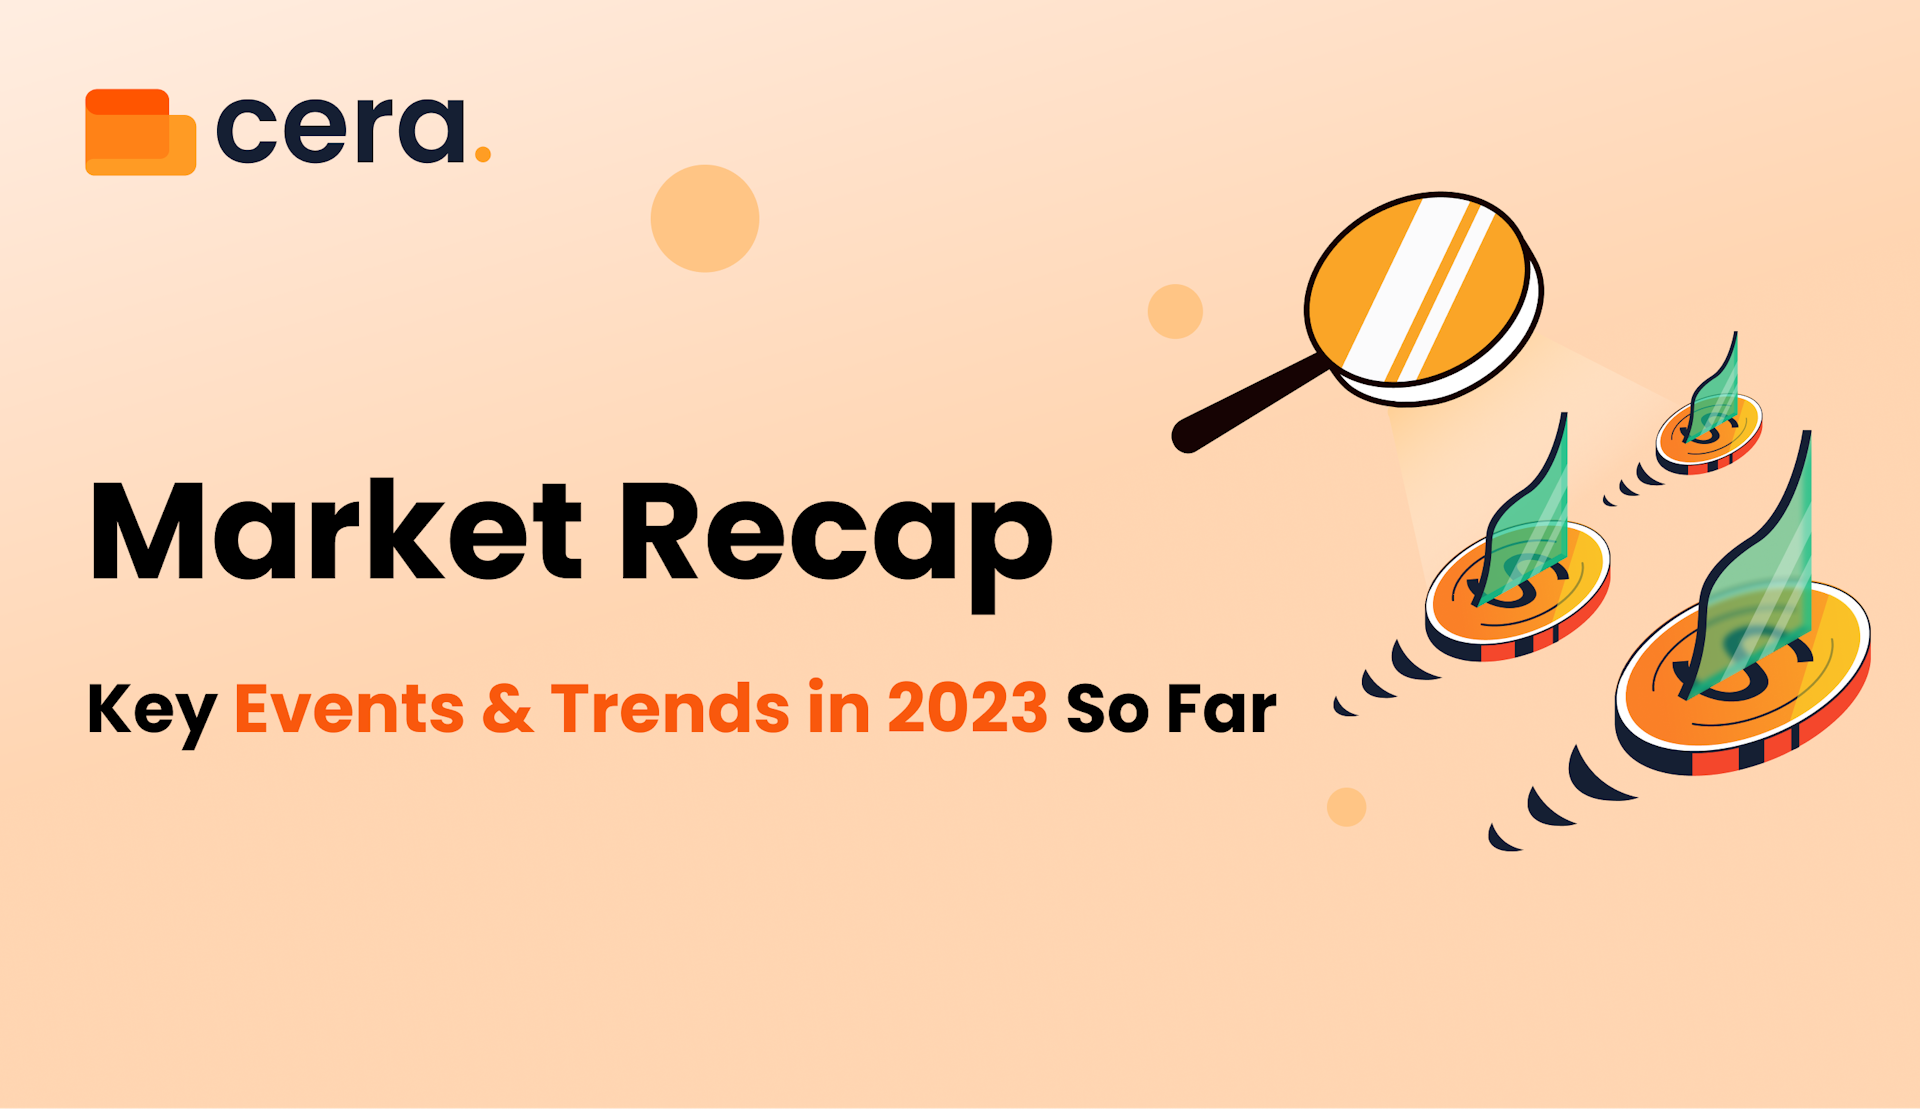 Market Recap: Key Events and Trends in 2023 So Far